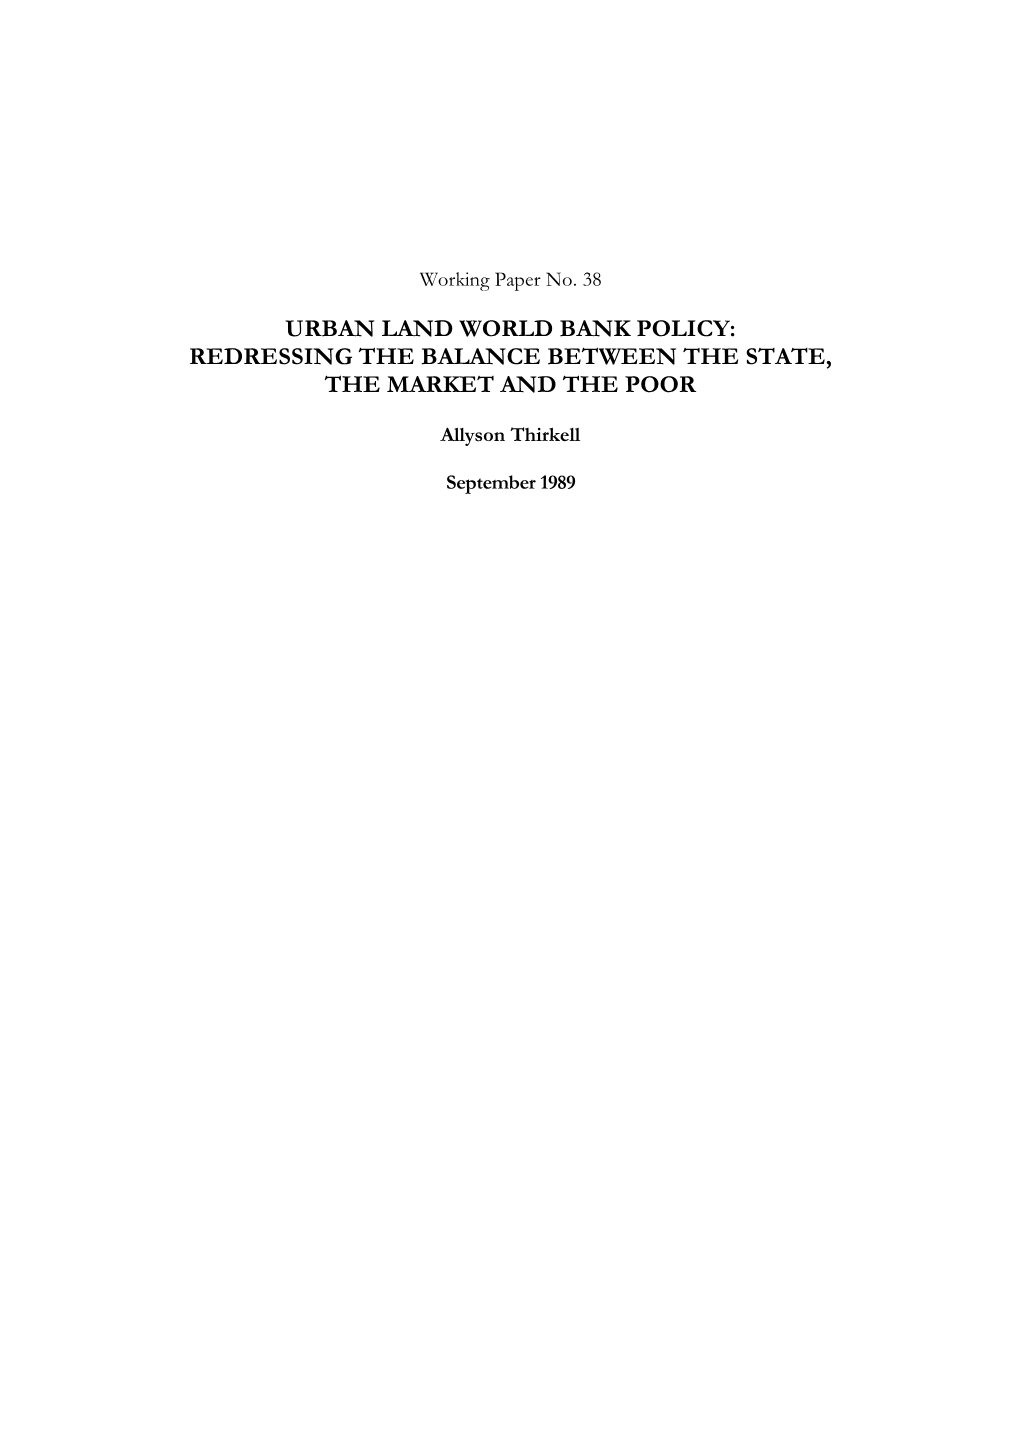 Urban Land World Bank Policy: Redressing the Balance Between the State, the Market and the Poor